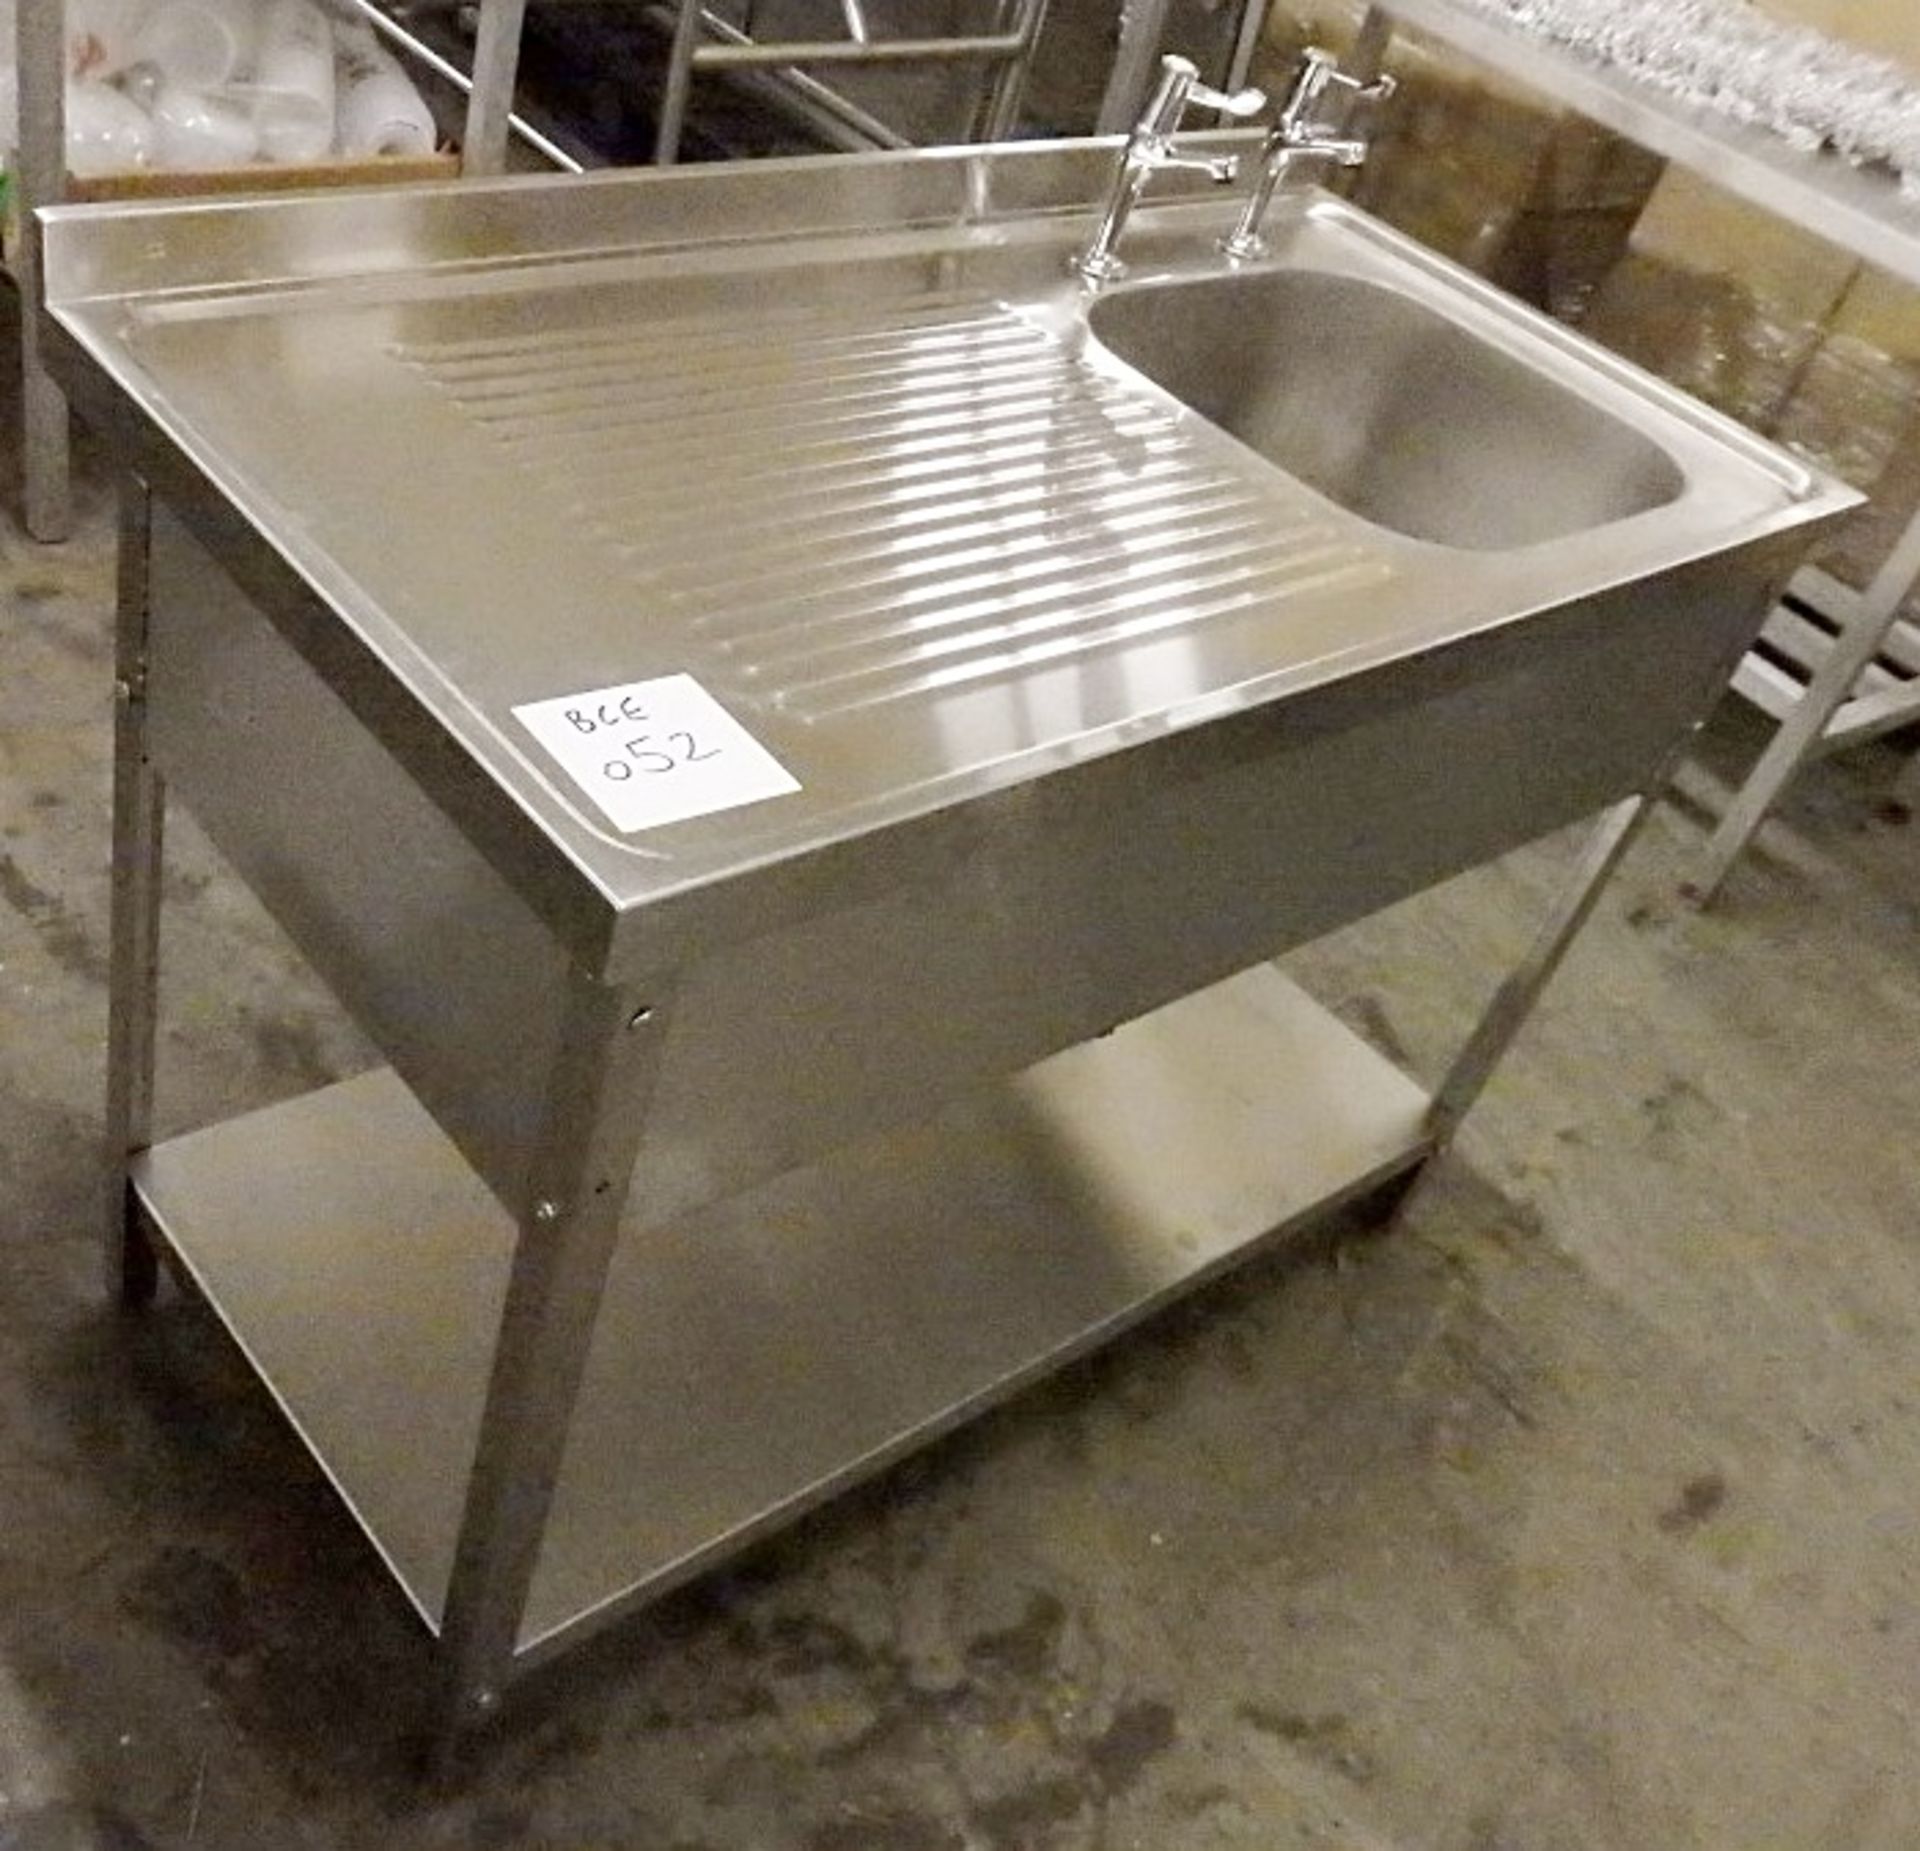 1 x Freestanding Commercial Stainless Steel Sink Unit - Dimensions: W120 x D60 x H92cm - Ref: BCE052 - Image 2 of 8